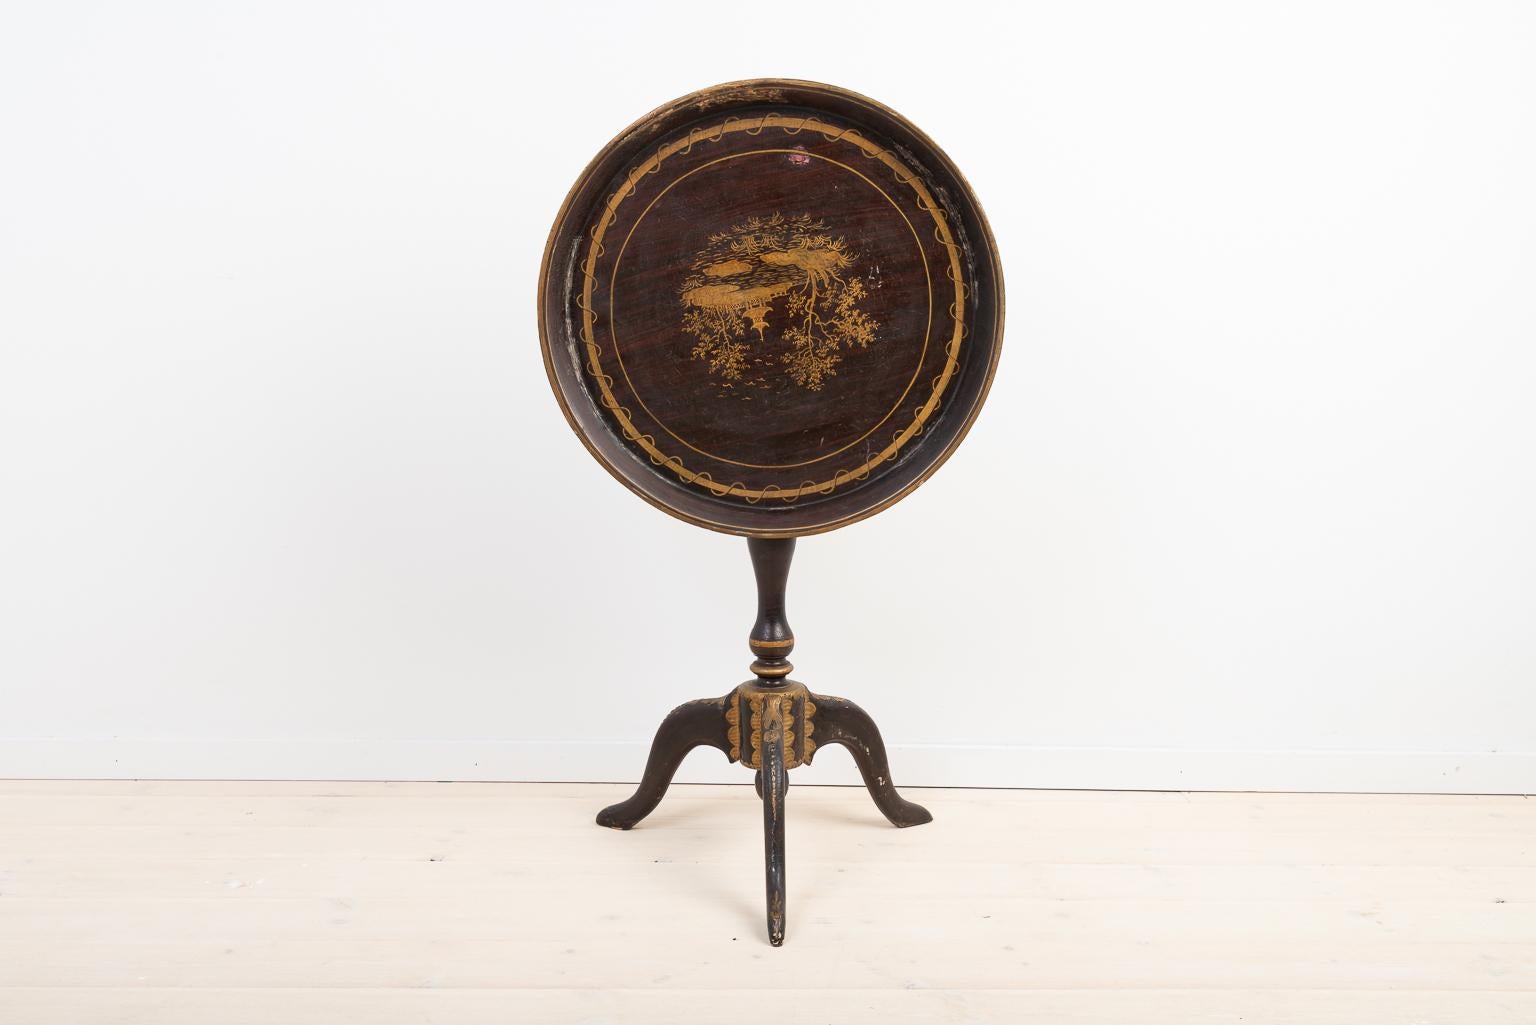 Late 18th century Swedish tray table. The table is decorated with wooden carvings. A fun detail is the painting on the table top is upside down when its folded up. The table is slightly askew – see pictures.